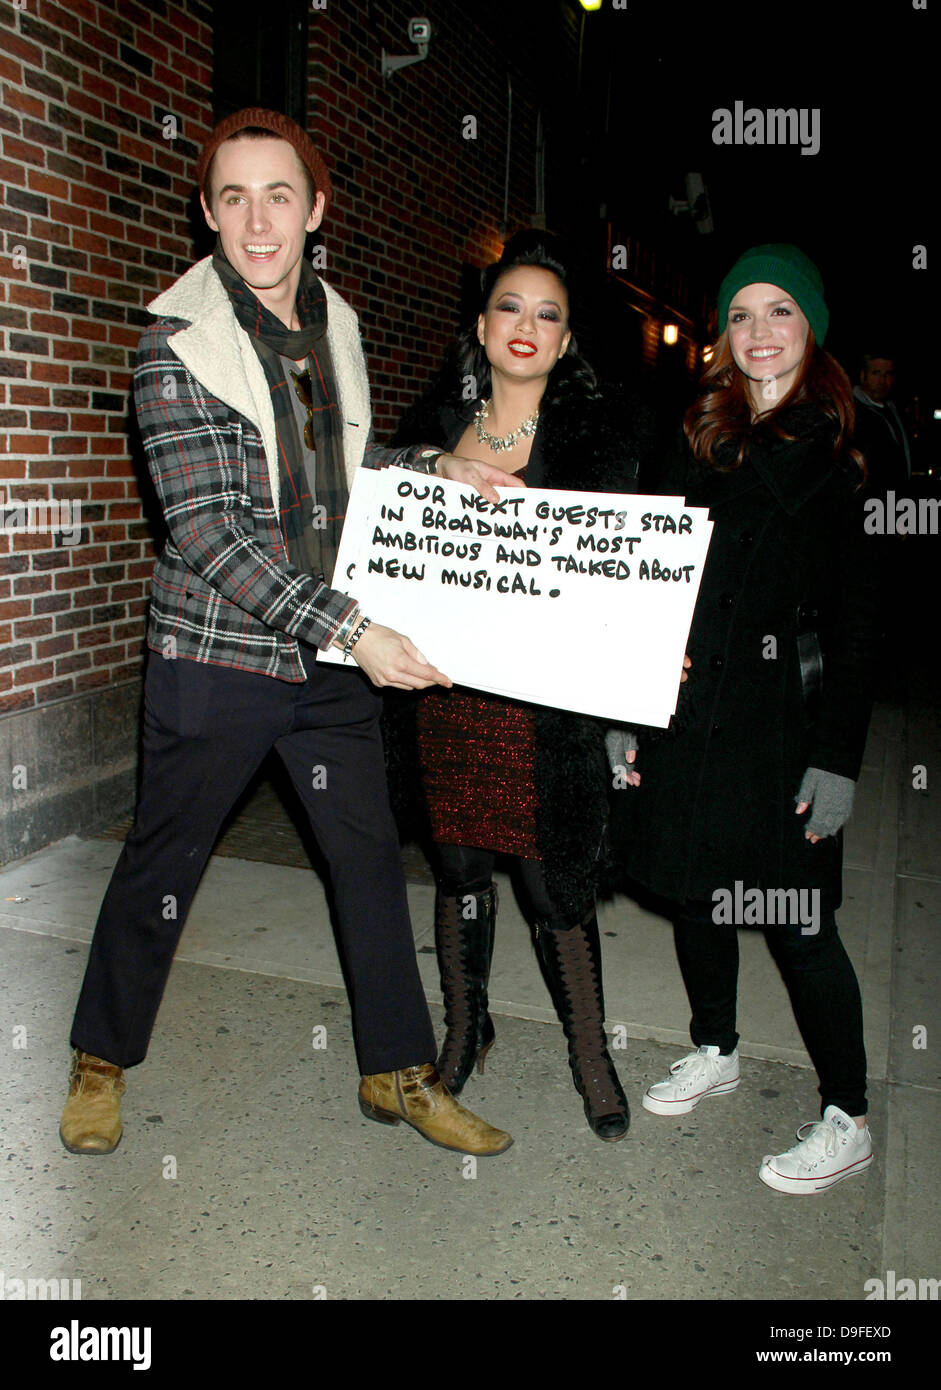 Reeve Camey as Peter Parker/Spiderman, T.V. Carpio as Arachne,  Jennifer Damiano as Mary Jane Watson 'The Late Show with David Letterman' at the Ed Sullivan Theater - Arrivals New York City, USA - 01.03.11 Stock Photo